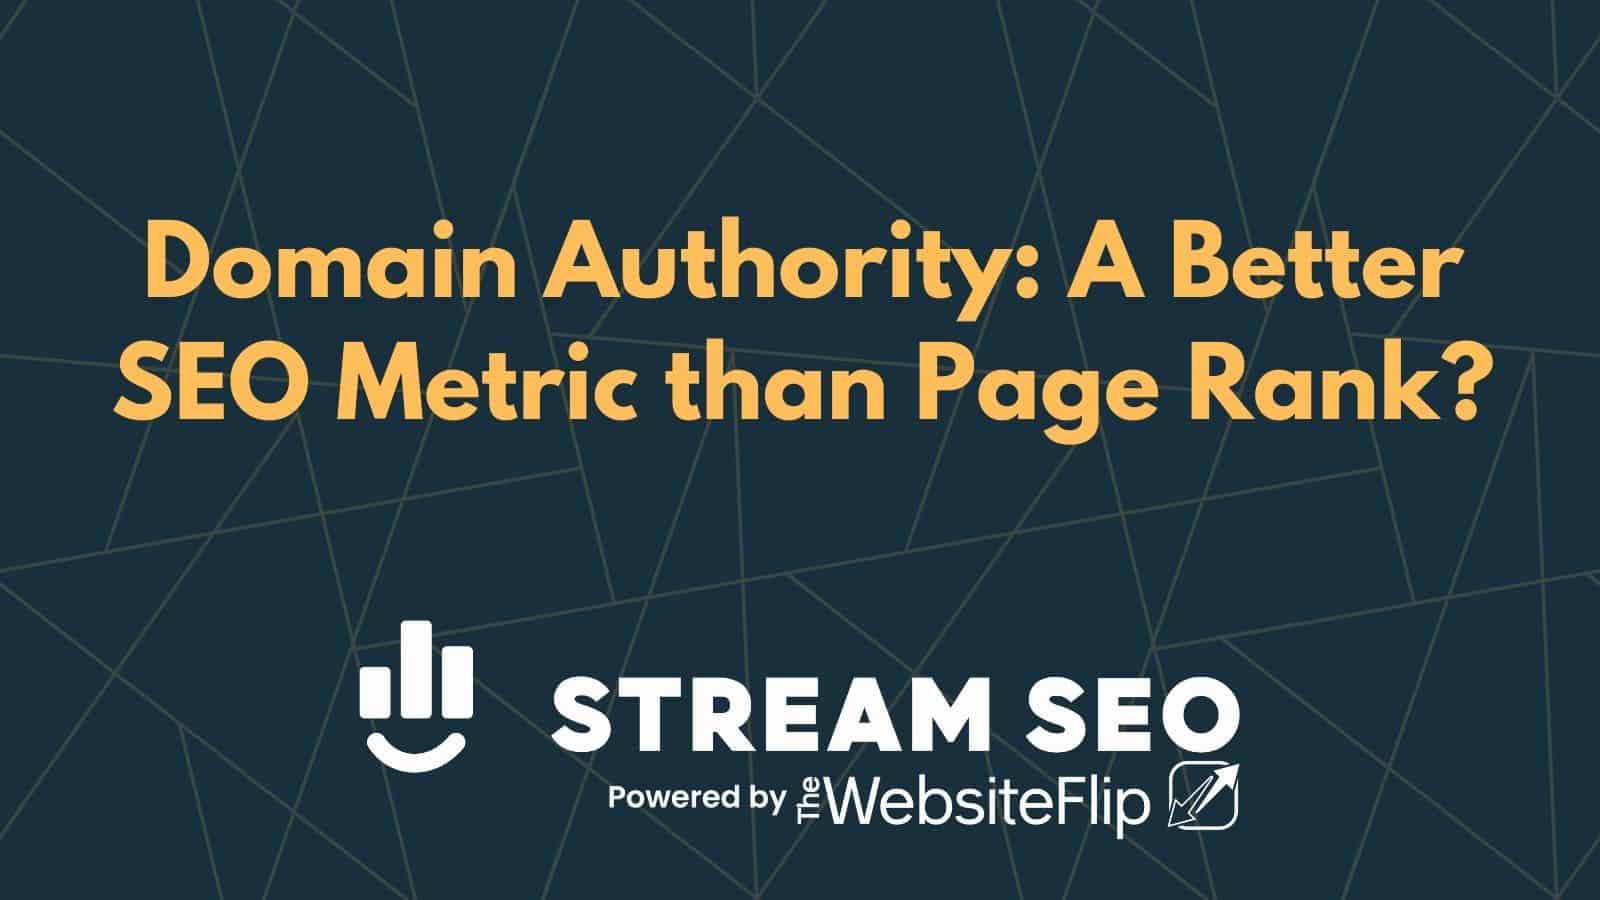 Domain Authority: A Better SEO Metric than Page Rank?